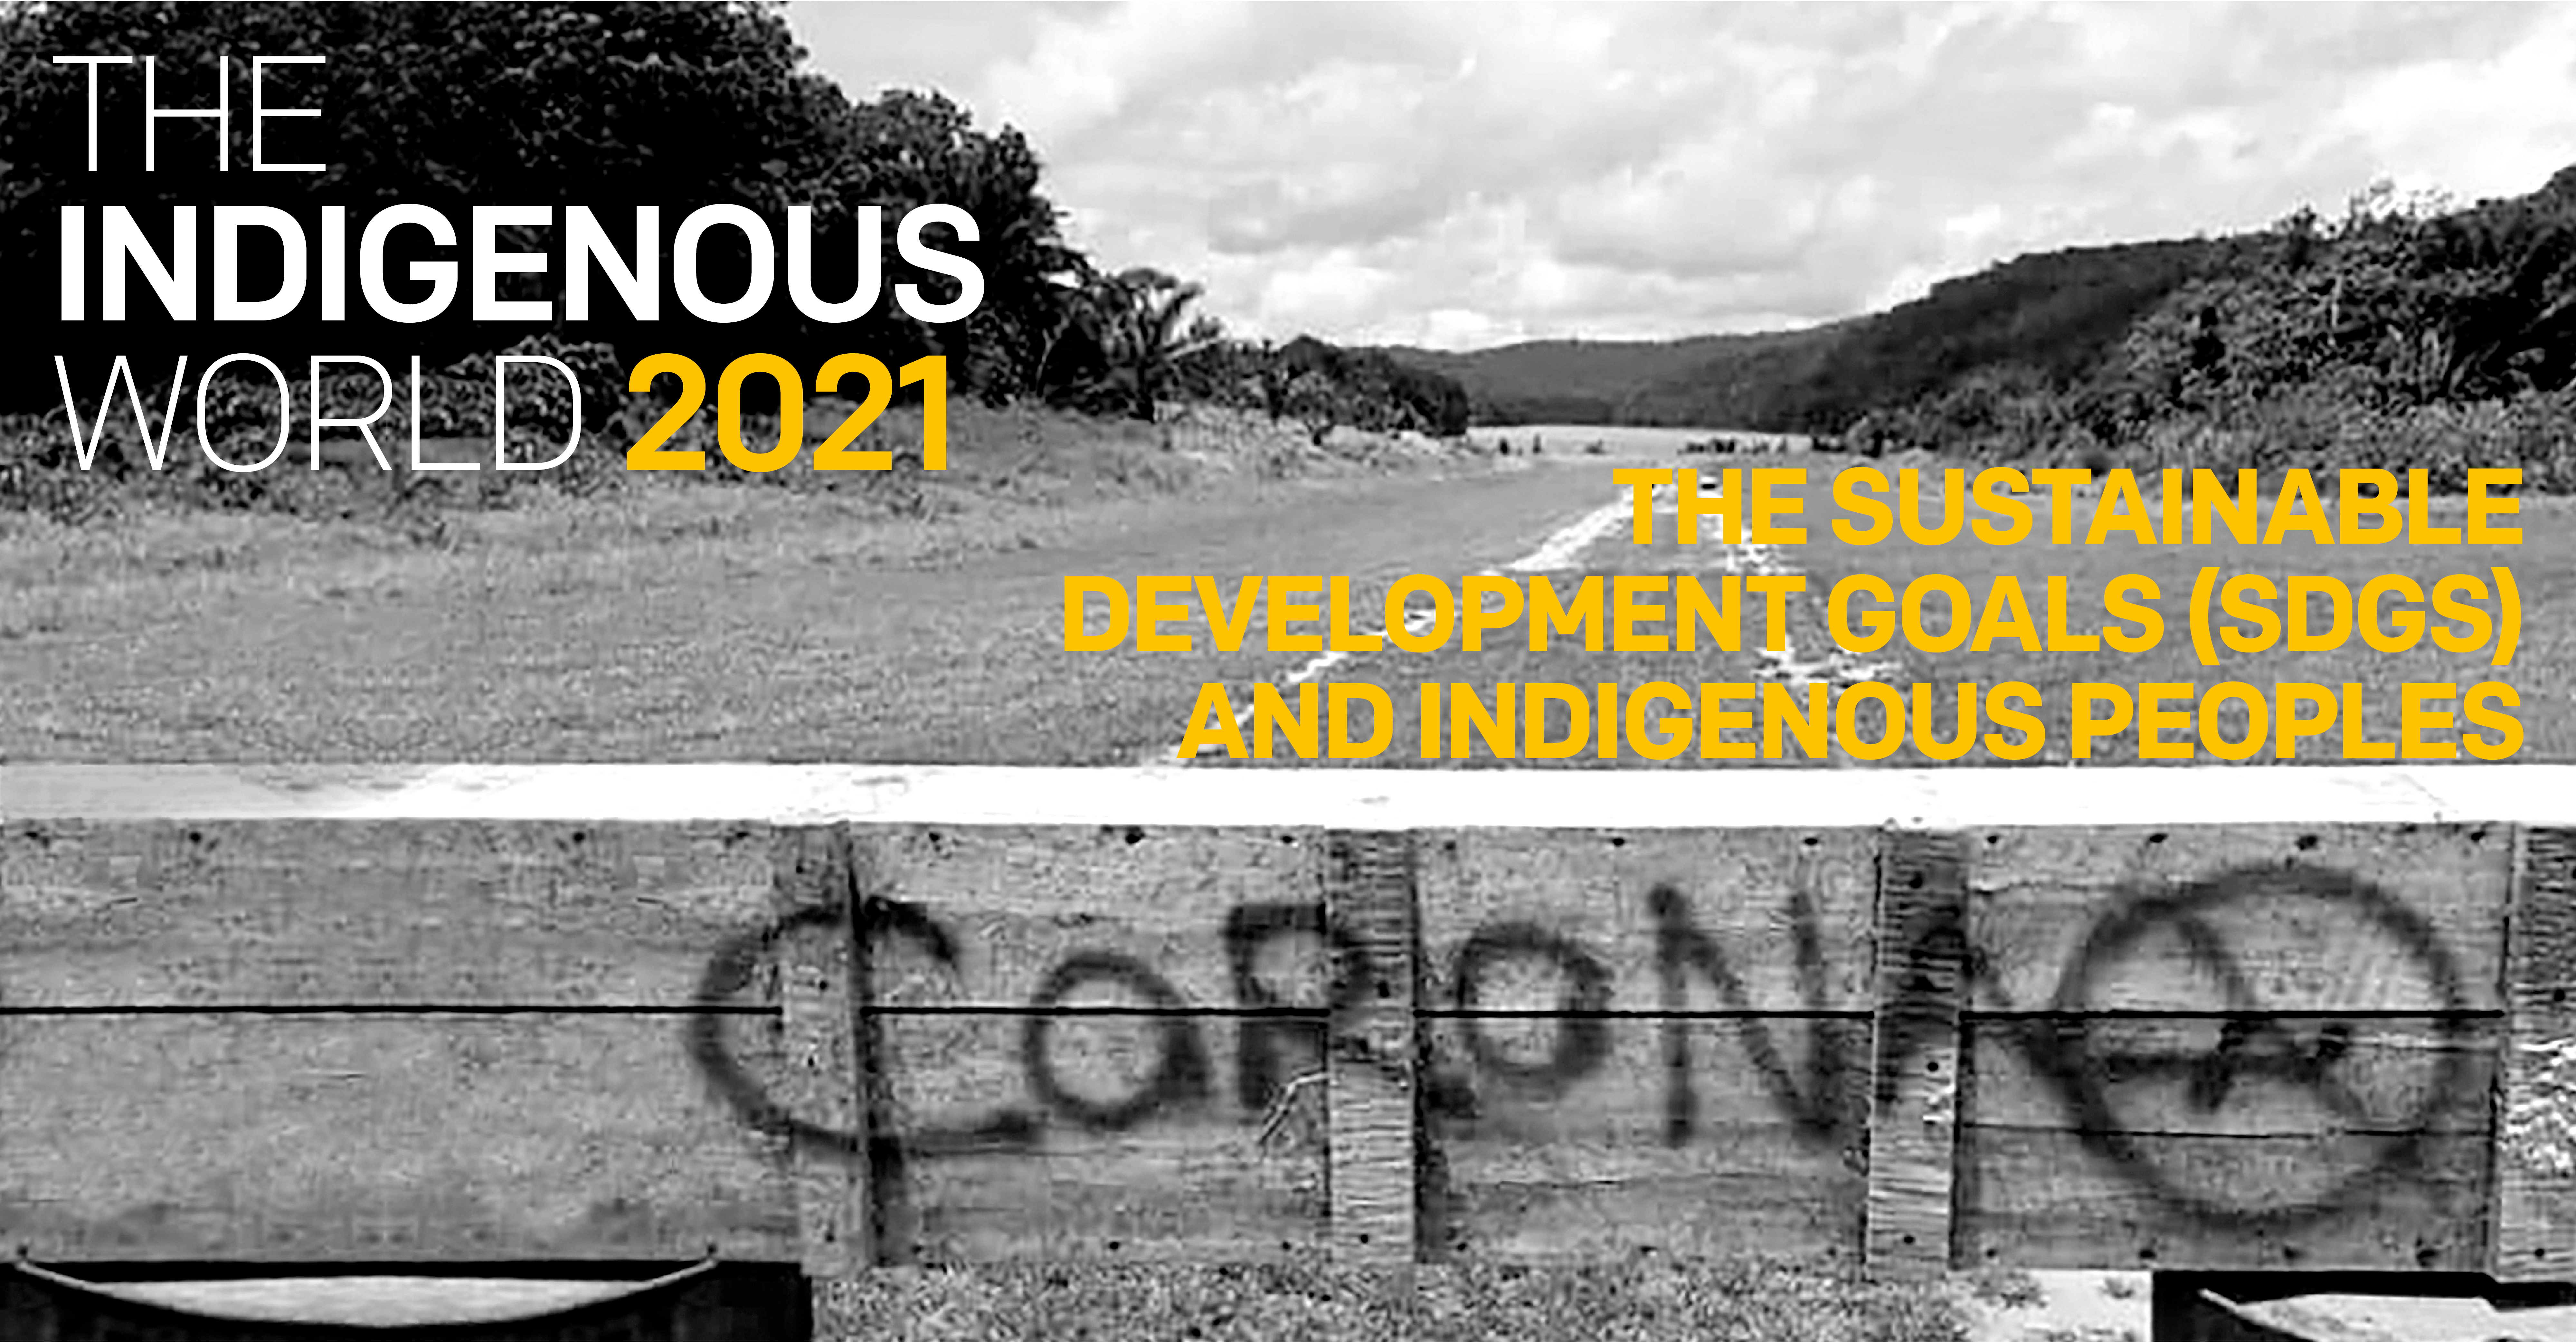 The Sustainable Development Goals (SDGs) and Indigenous Peoples